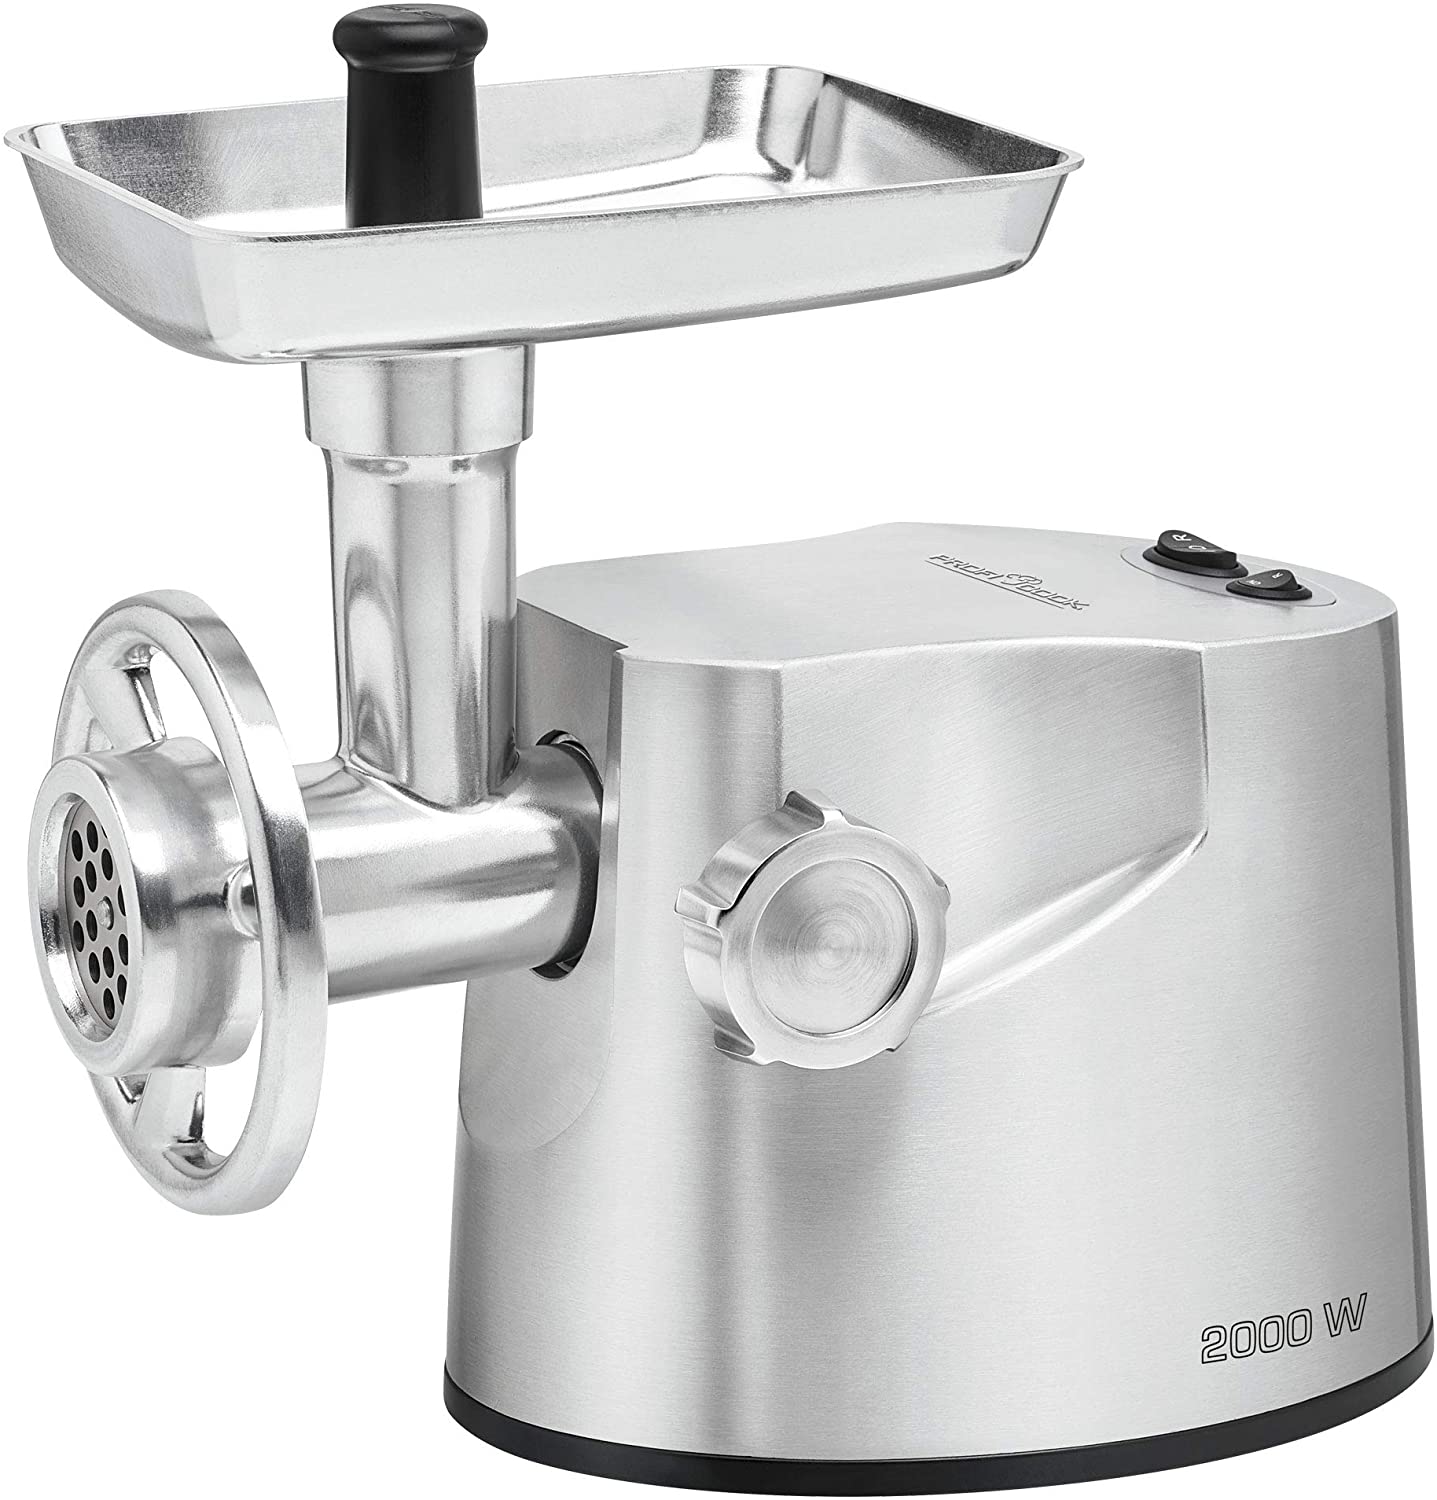 ProfiCook Profi Cook PC-FW 1173 Electric Meat Mincer for Meat, Sausage and Pastry, 2 kg/min, with Sausage Filler Attachment, Kebbe Attachment and 3 Stainless Steel Perforated Discs, 2000 W, Stainless Steel